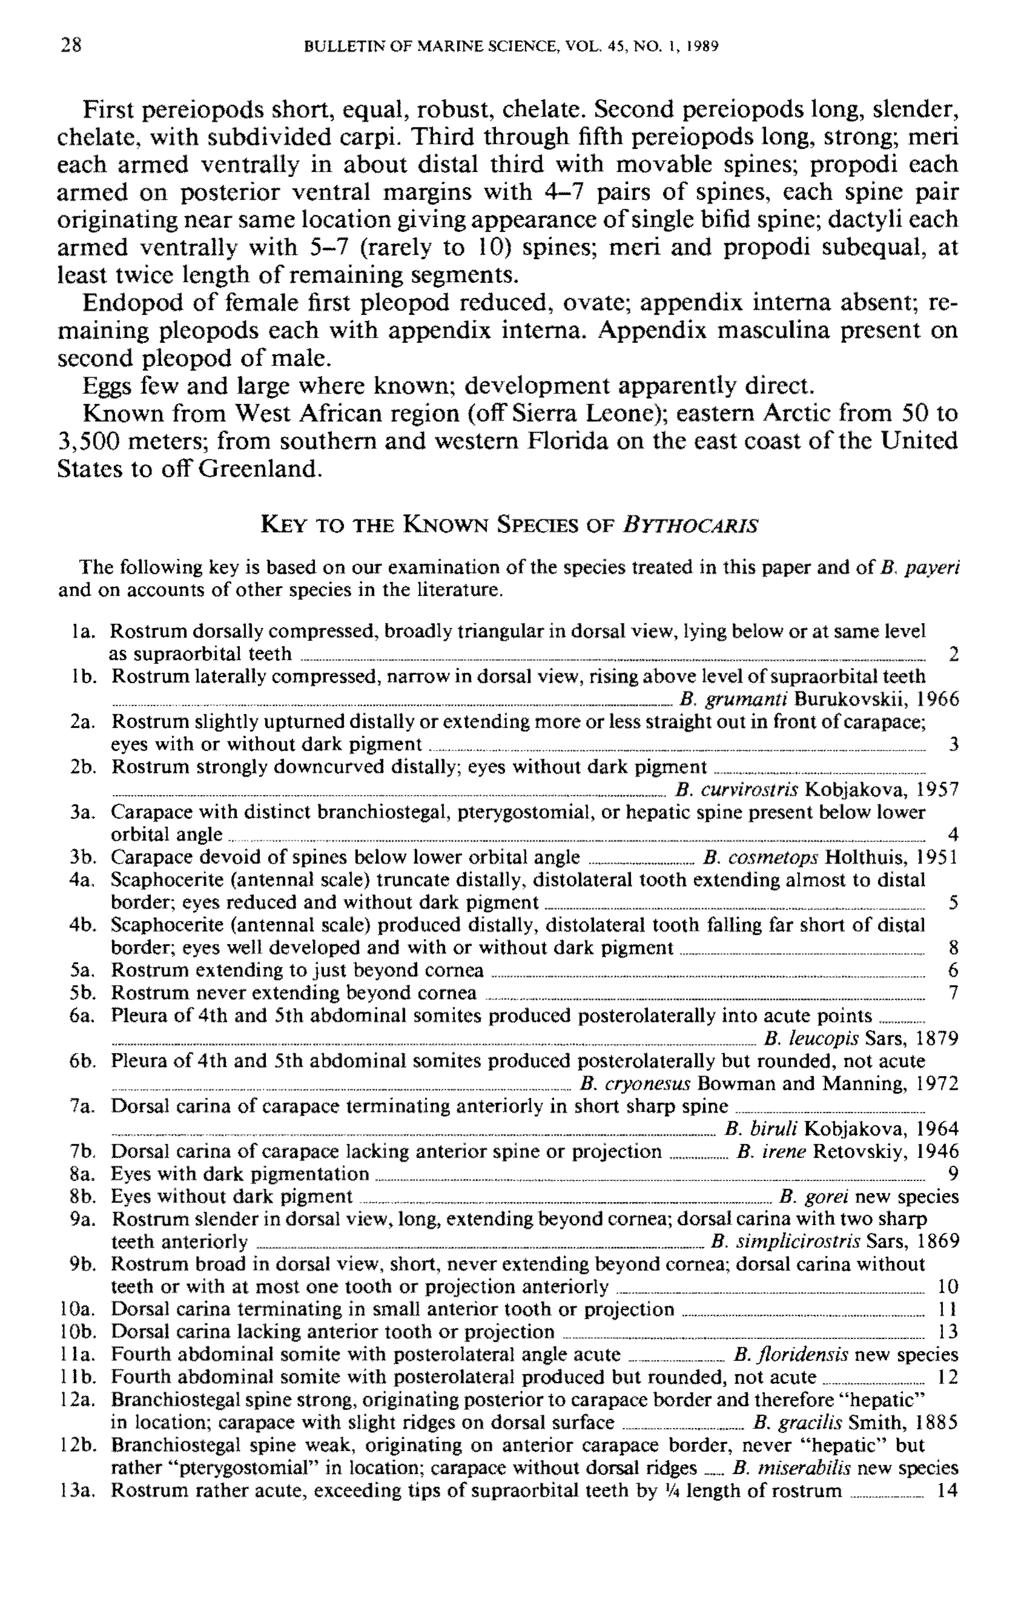 28 BULLETIN OF MARINE SCIENCE, VOL. 45, NO. 1, 1989 First pereiopods short, equal, robust, chelate. Second pereiopods long, slender, chelate, with subdivided carpi.